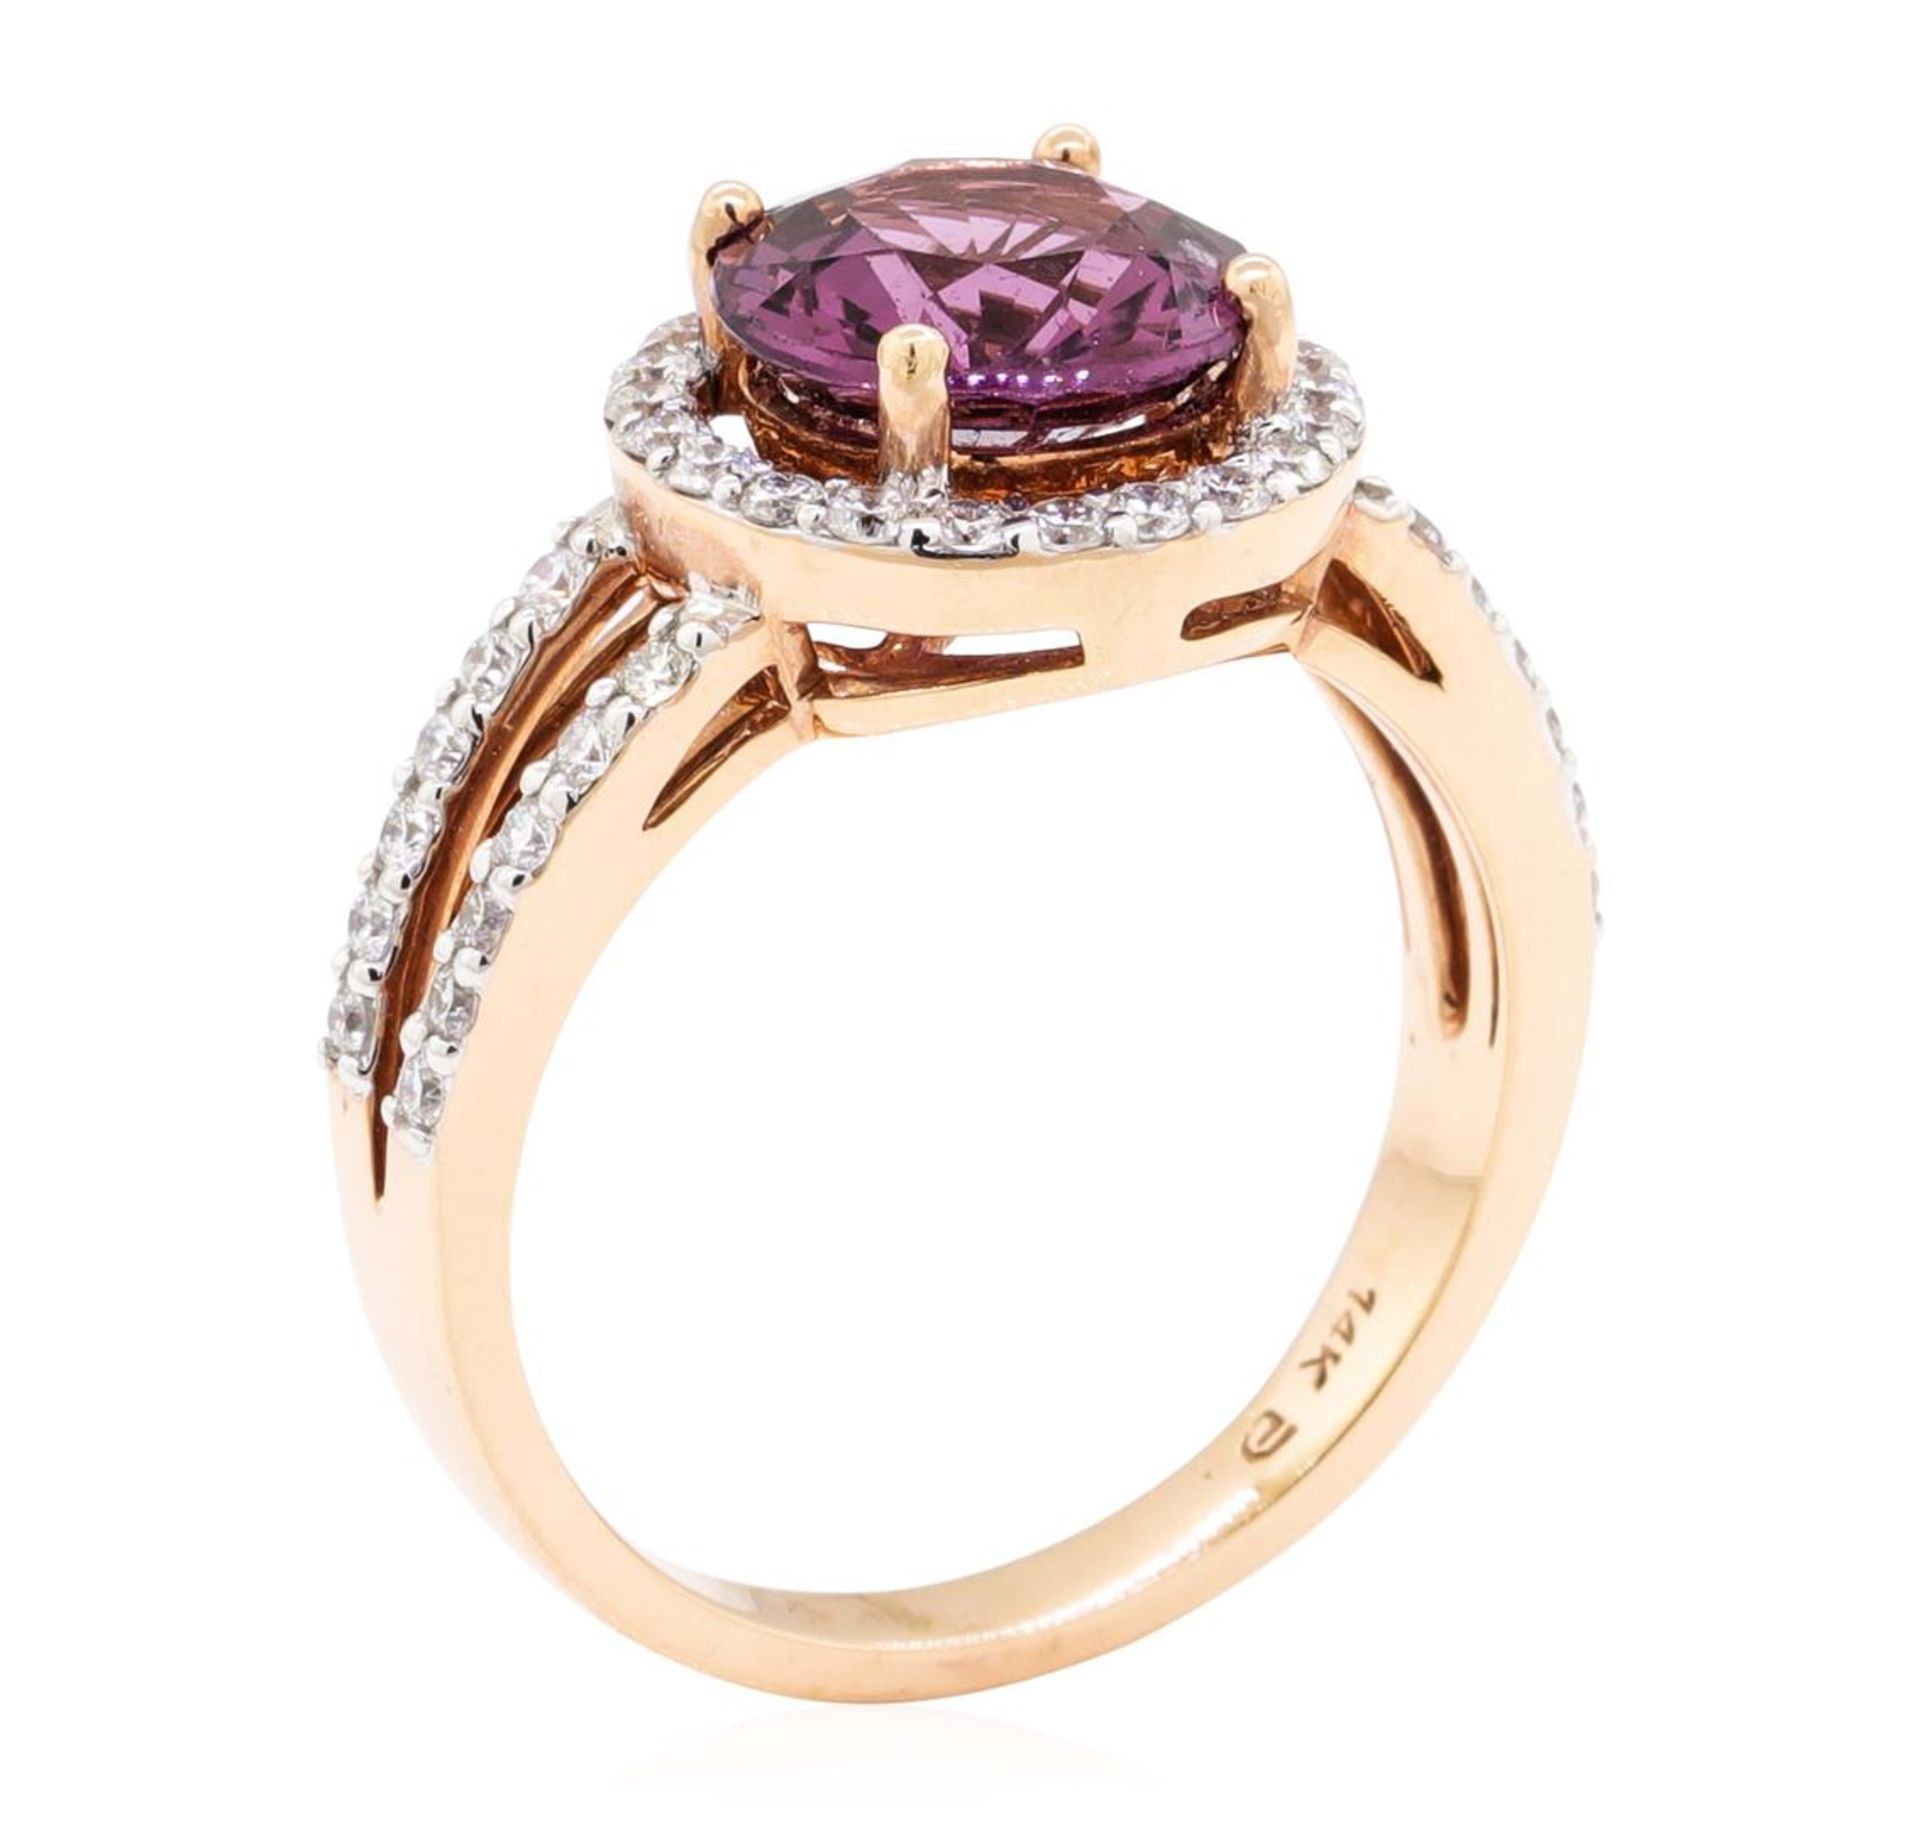 2.94 ctw Round Mixed Lavender Spinel And Round Brilliant Cut Diamond Ring - 14KT - Image 4 of 5